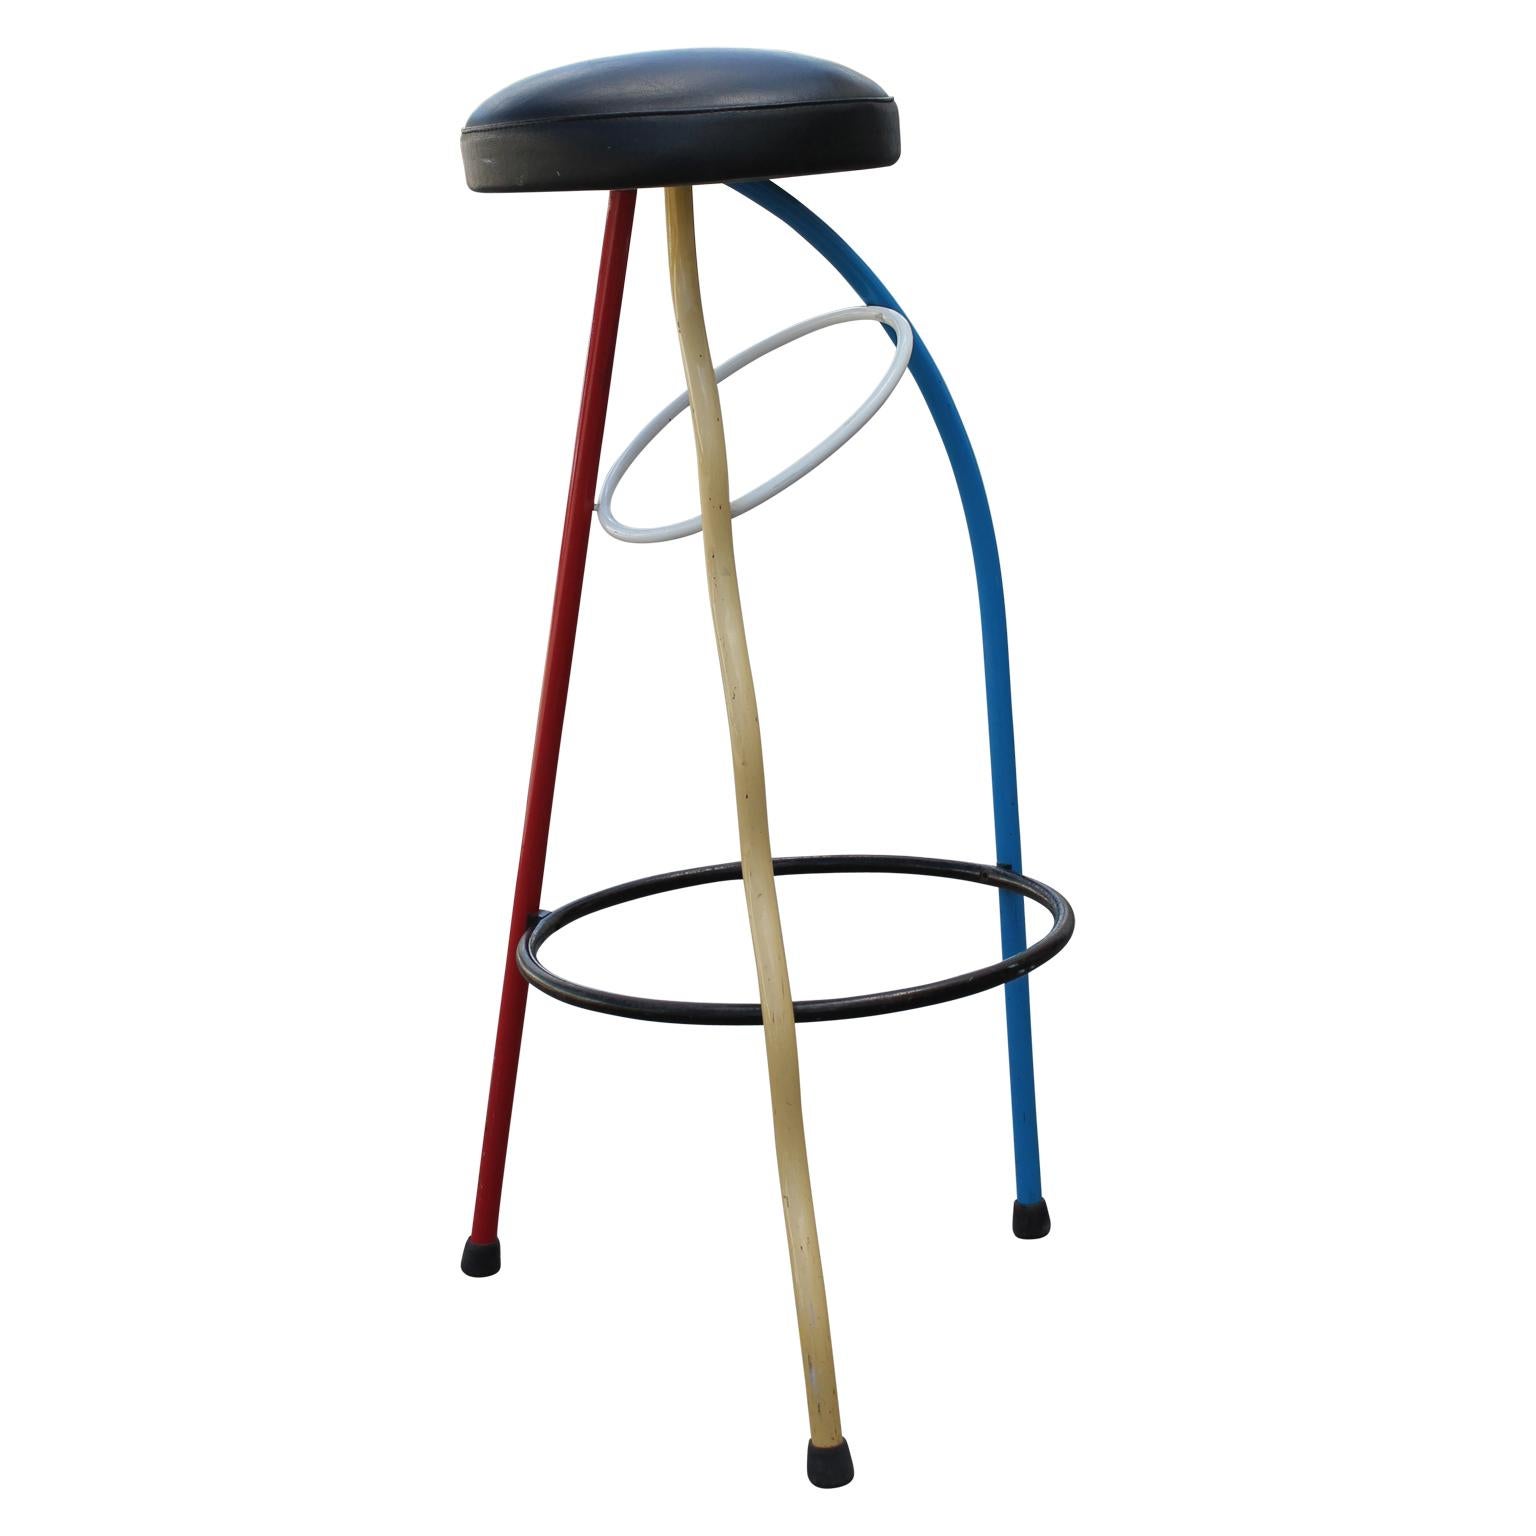 Spanish Pair of Javier Mariscal Memphis Duplex Bar Stools in Red, Blue, and Yellow